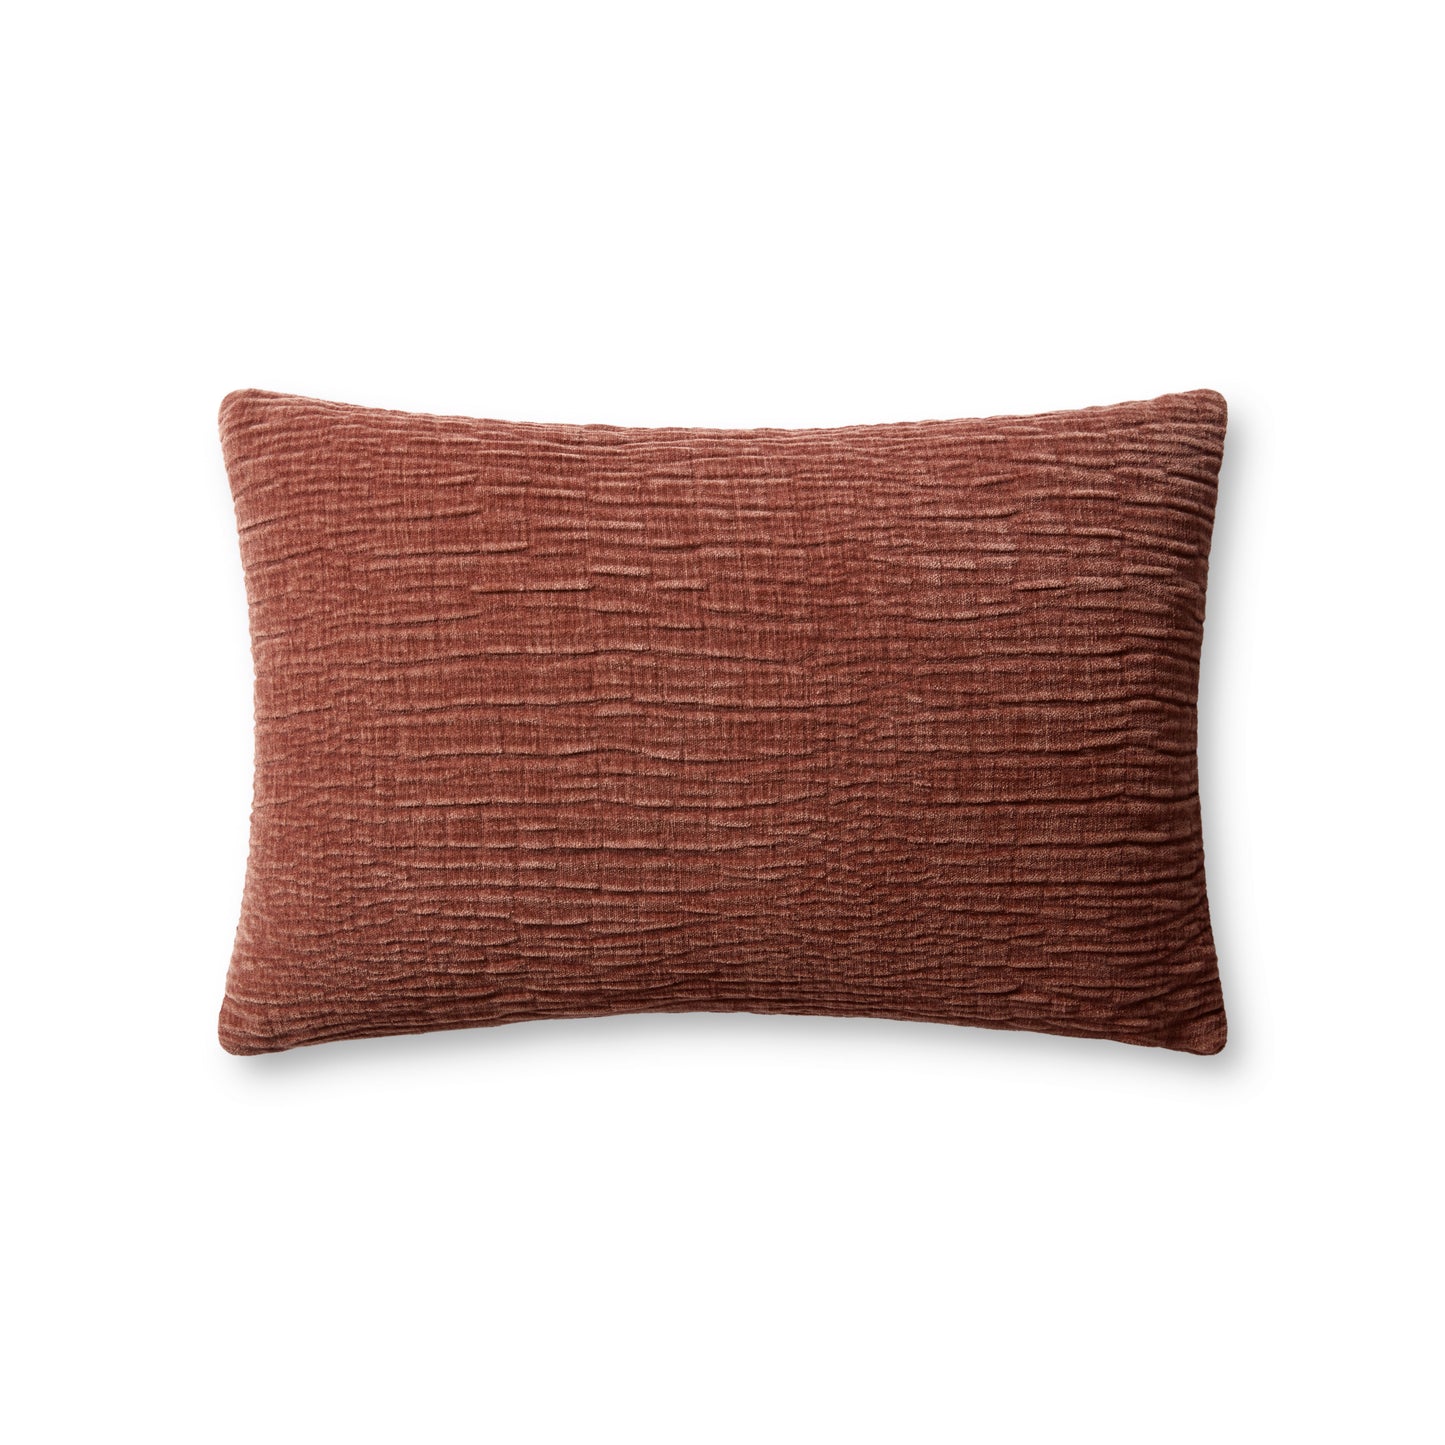 Photo of a pillow;  Copper 13'' x 21'' Cover w/Poly Pillow